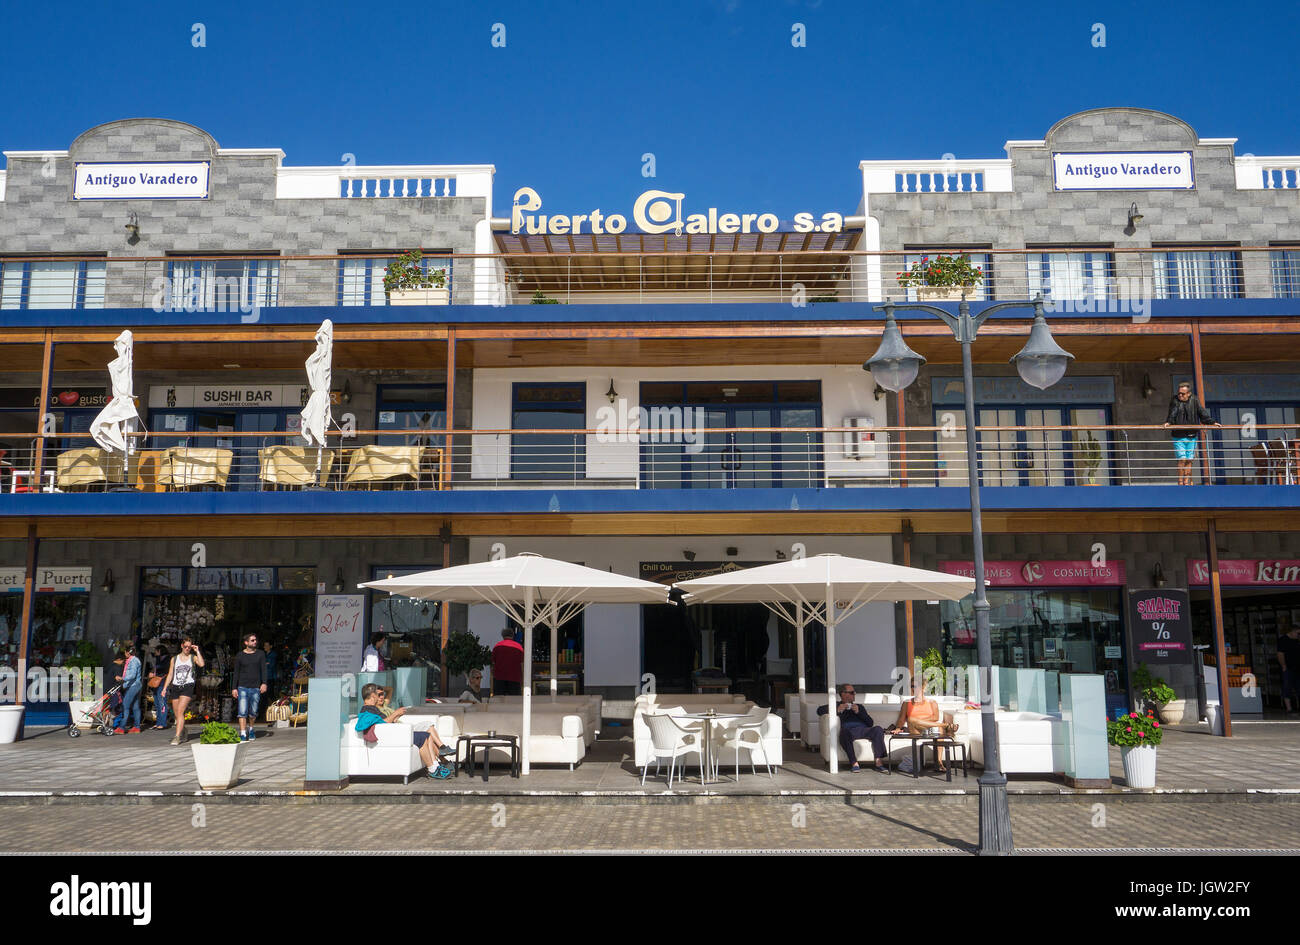 Coffee shop and shops at the harbour promenade, Yacht harbour, Puerto Calero, Lanzarote island, Canary islands, Spain, Europe Stock Photo